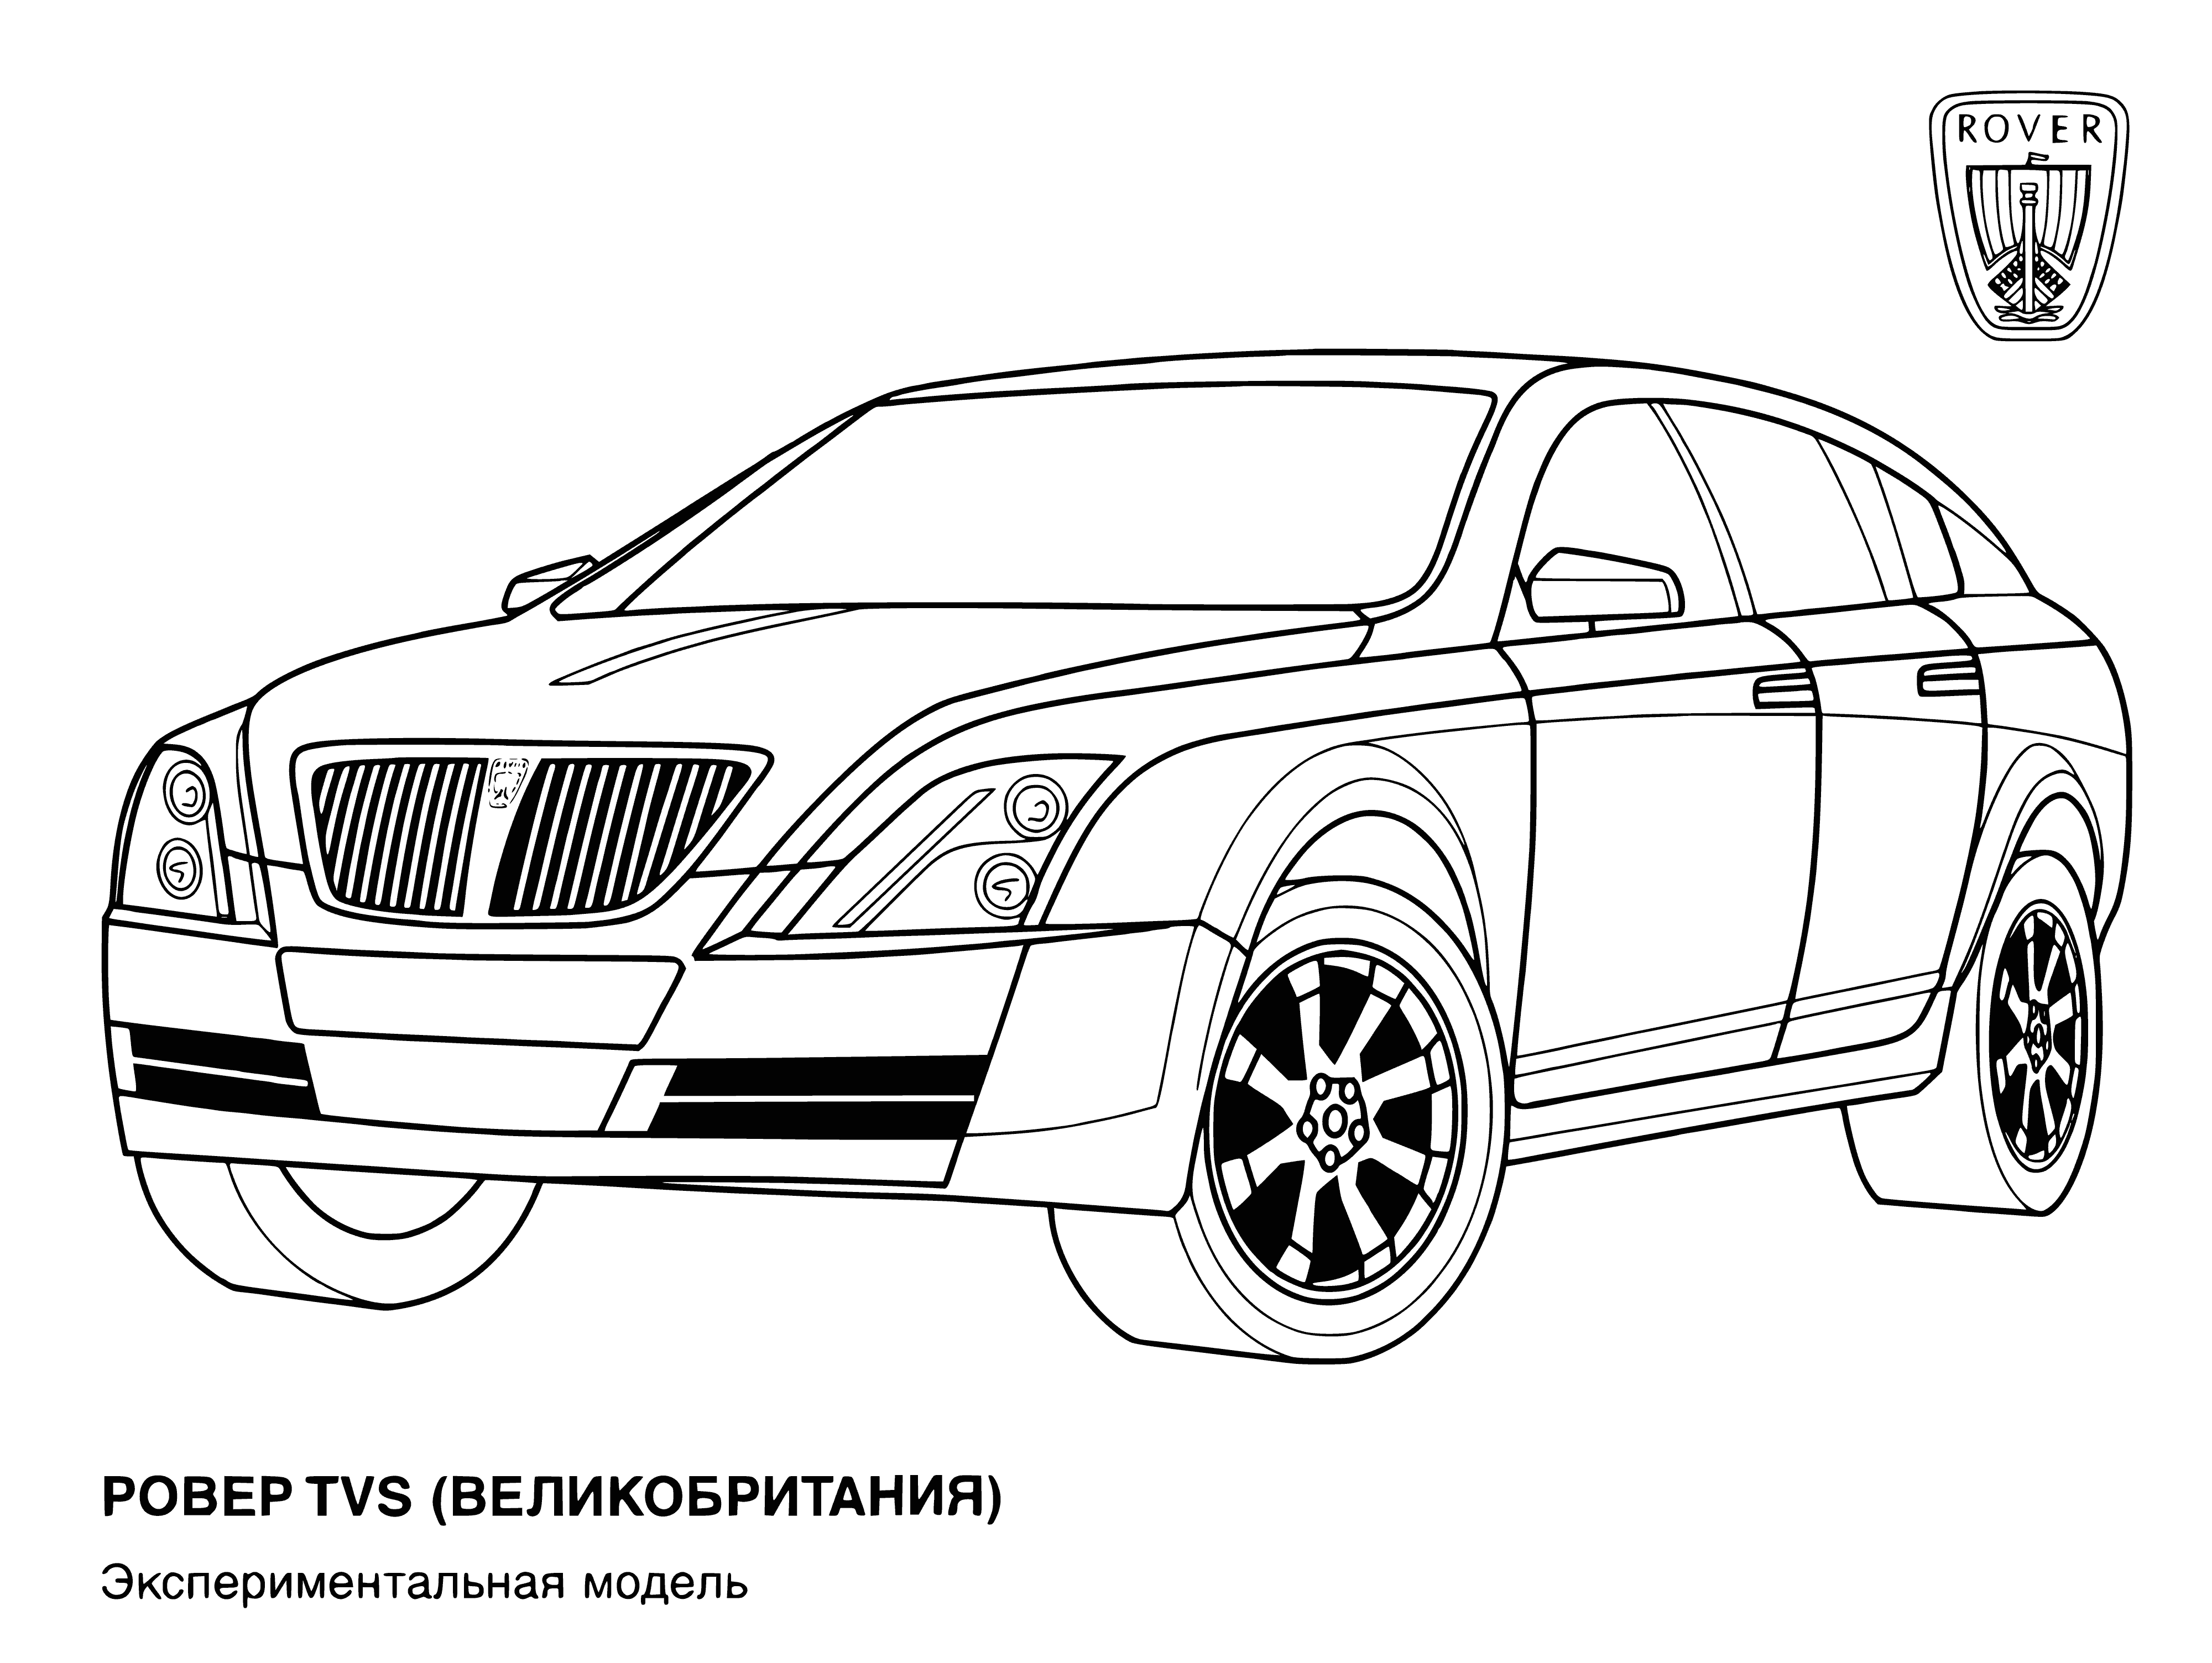 coloring page: New Rover cars are stylish and available in a variety of colors - perfect to express your personality! #newcar #rover